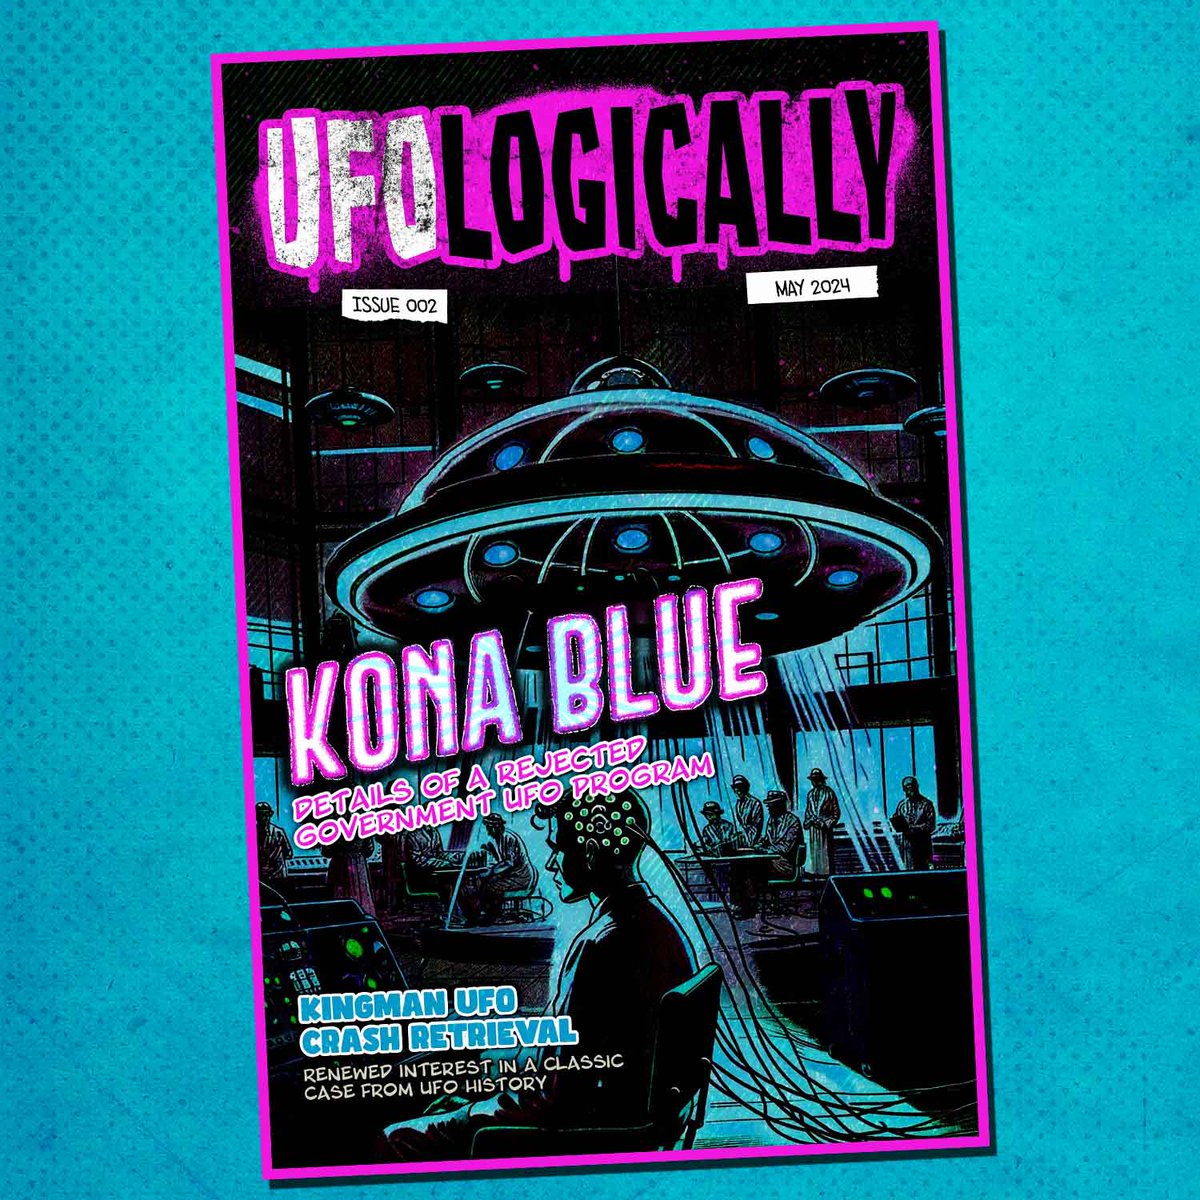 Issue 002 is out now! Check it out here: issuu.com/ufologically/d… #ufos #zine #ufozine